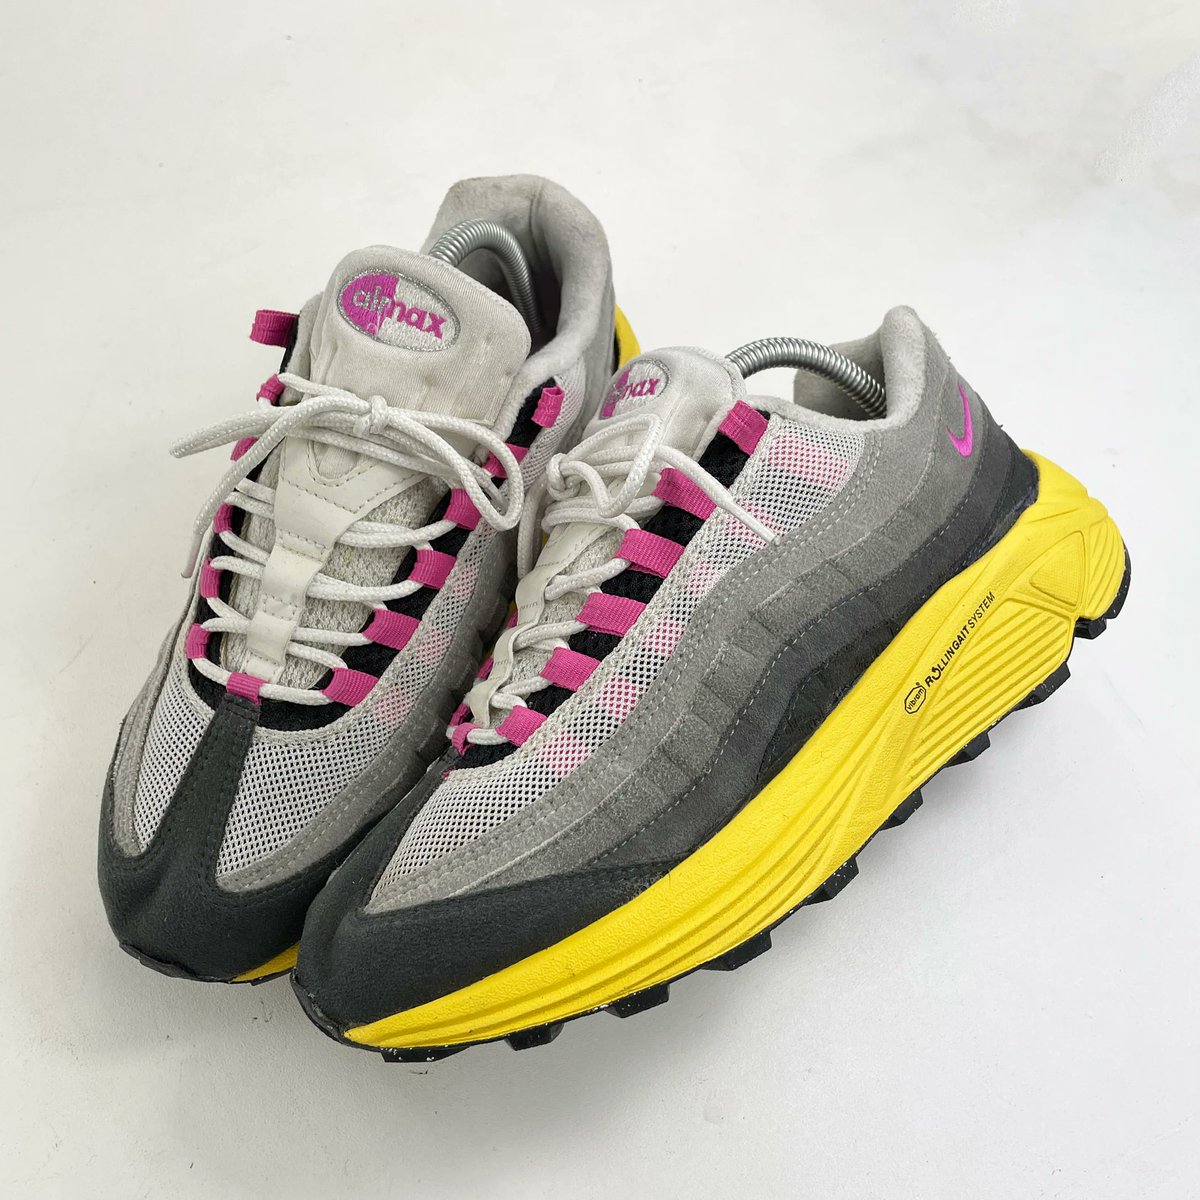 late to the nike server party, but the fire pink AM95s refit with the yellow vibram soles go so crazy. love this.